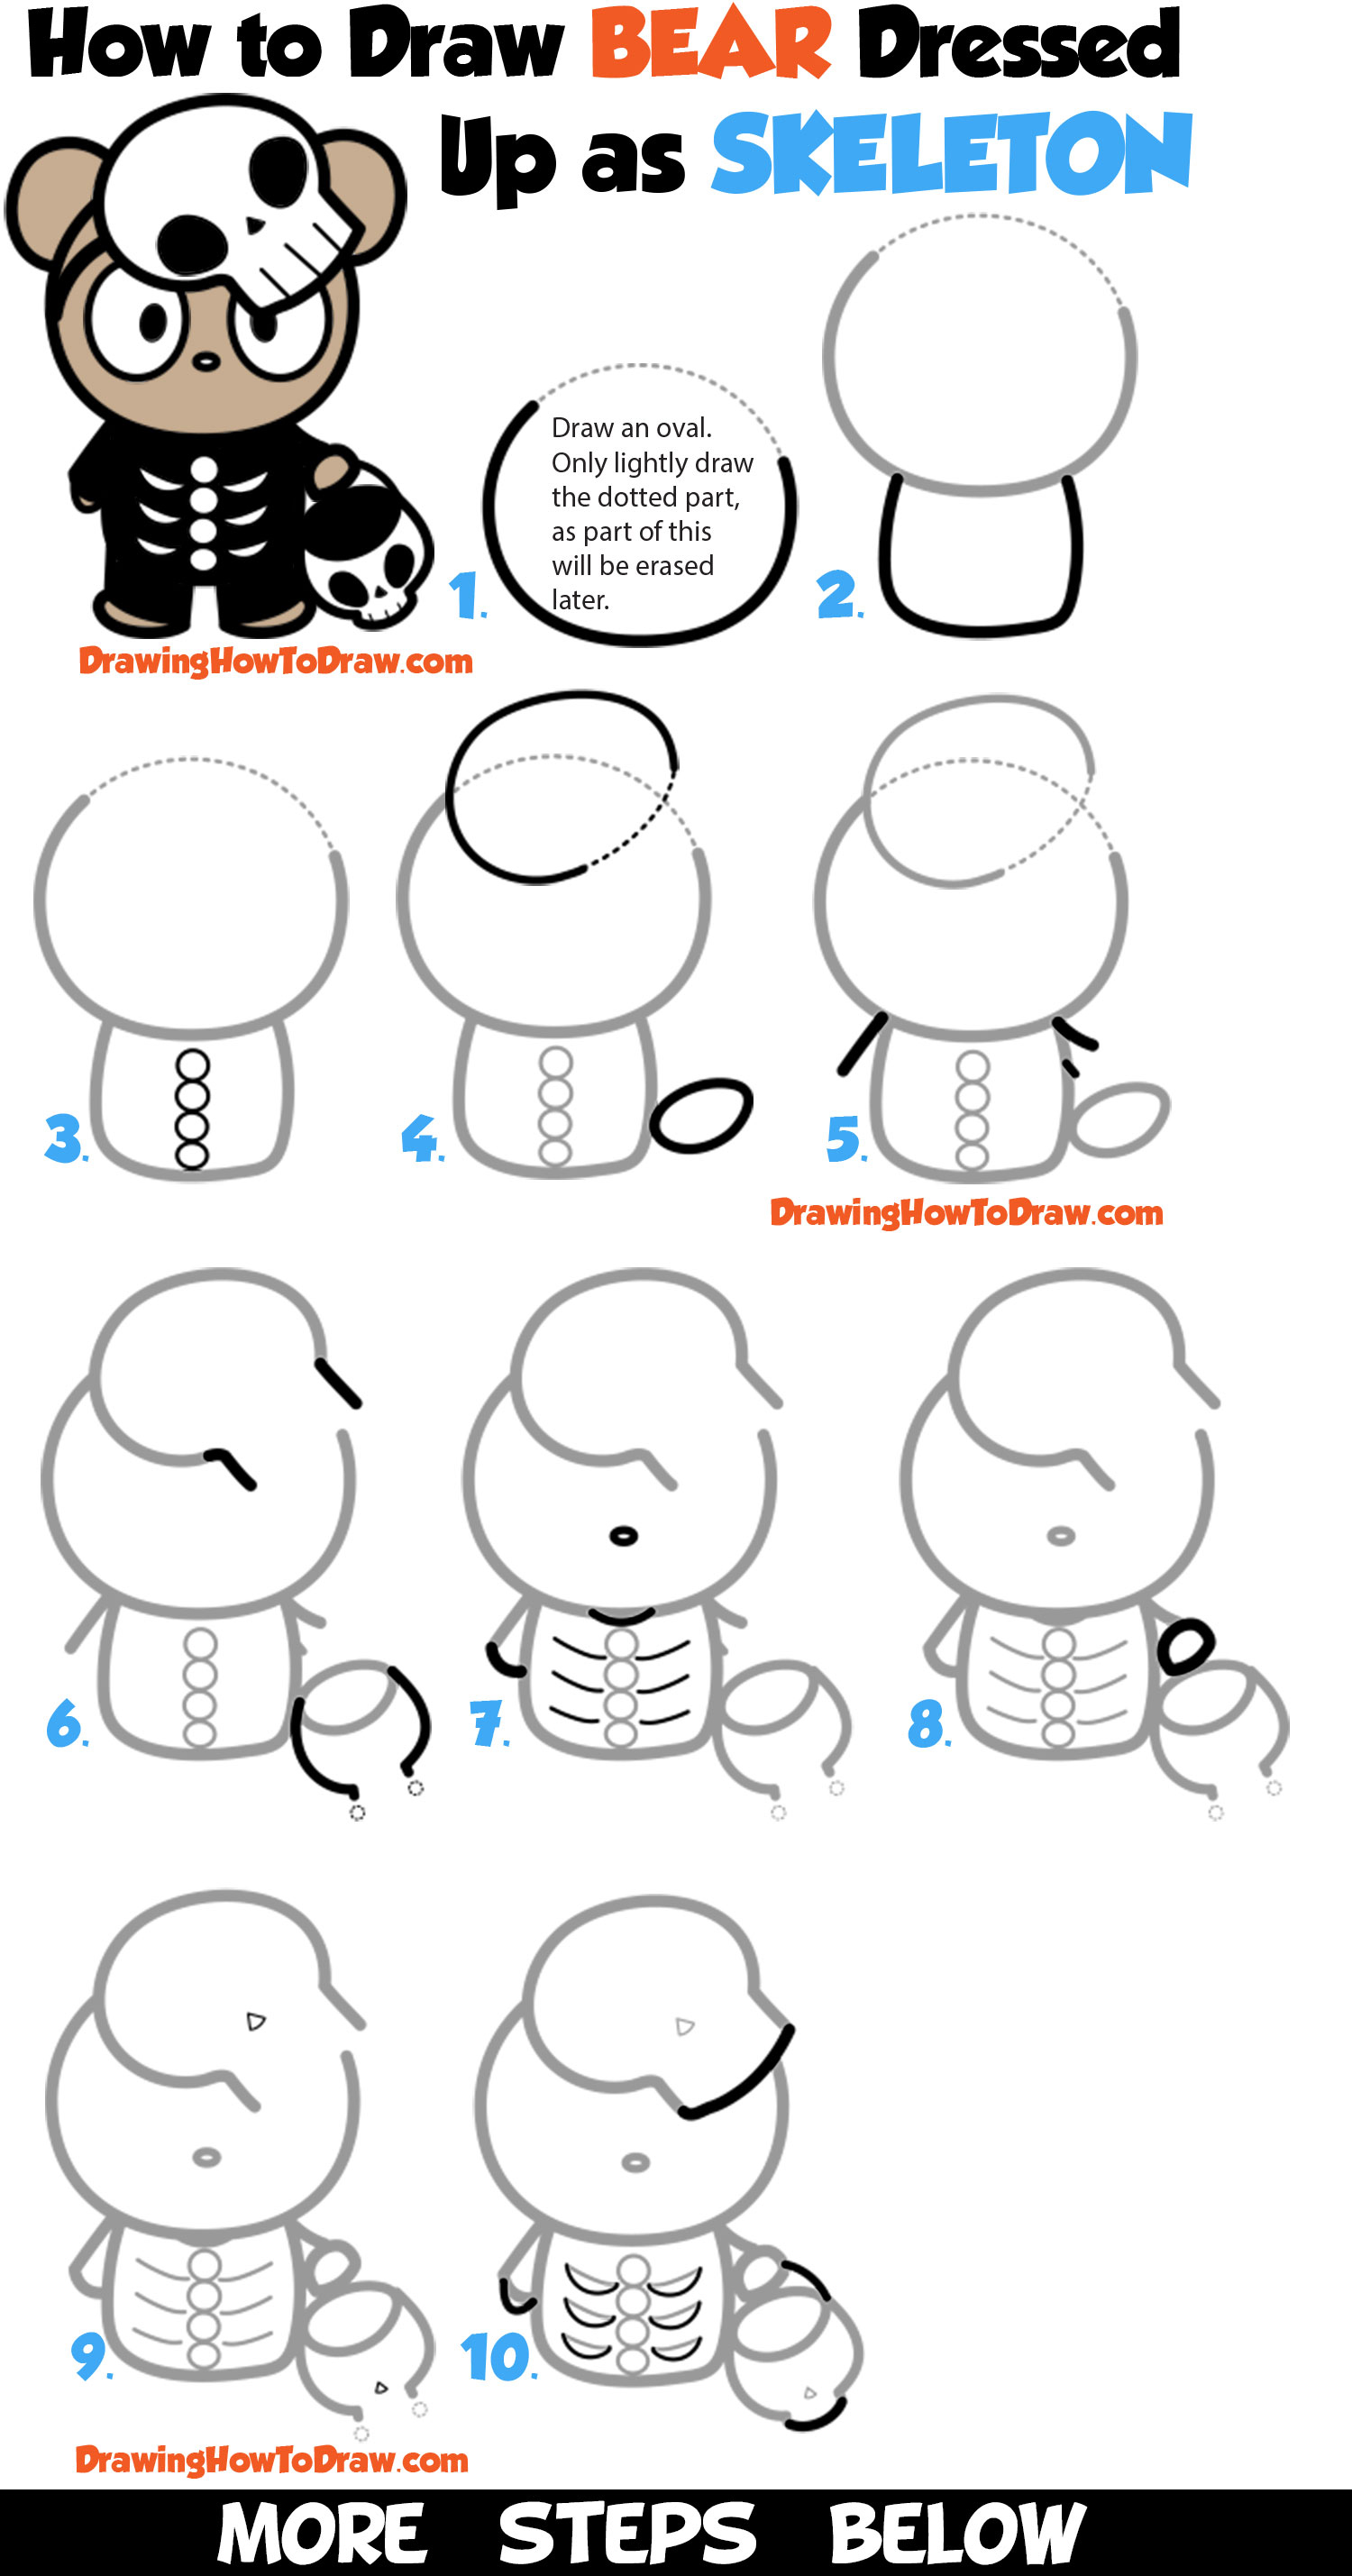 How to Draw a Cute Cartoon Bear Trick-or-Treater Dressed Up as a Skeleton for Halloween Easy Steps Drawing Lesson for Kids